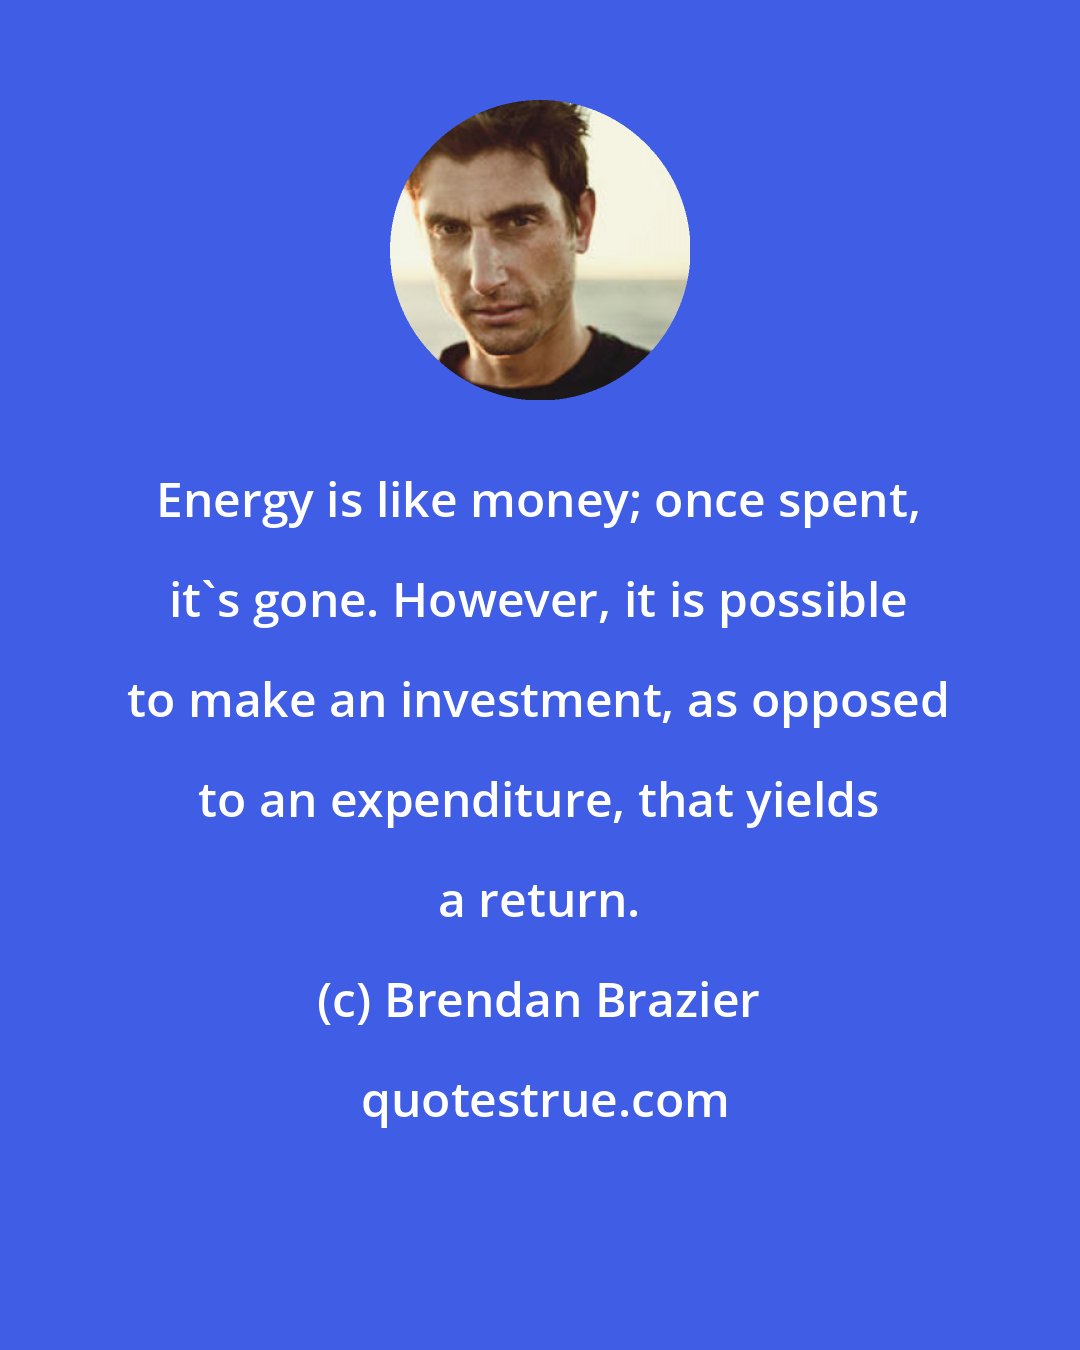 Brendan Brazier: Energy is like money; once spent, it's gone. However, it is possible to make an investment, as opposed to an expenditure, that yields a return.